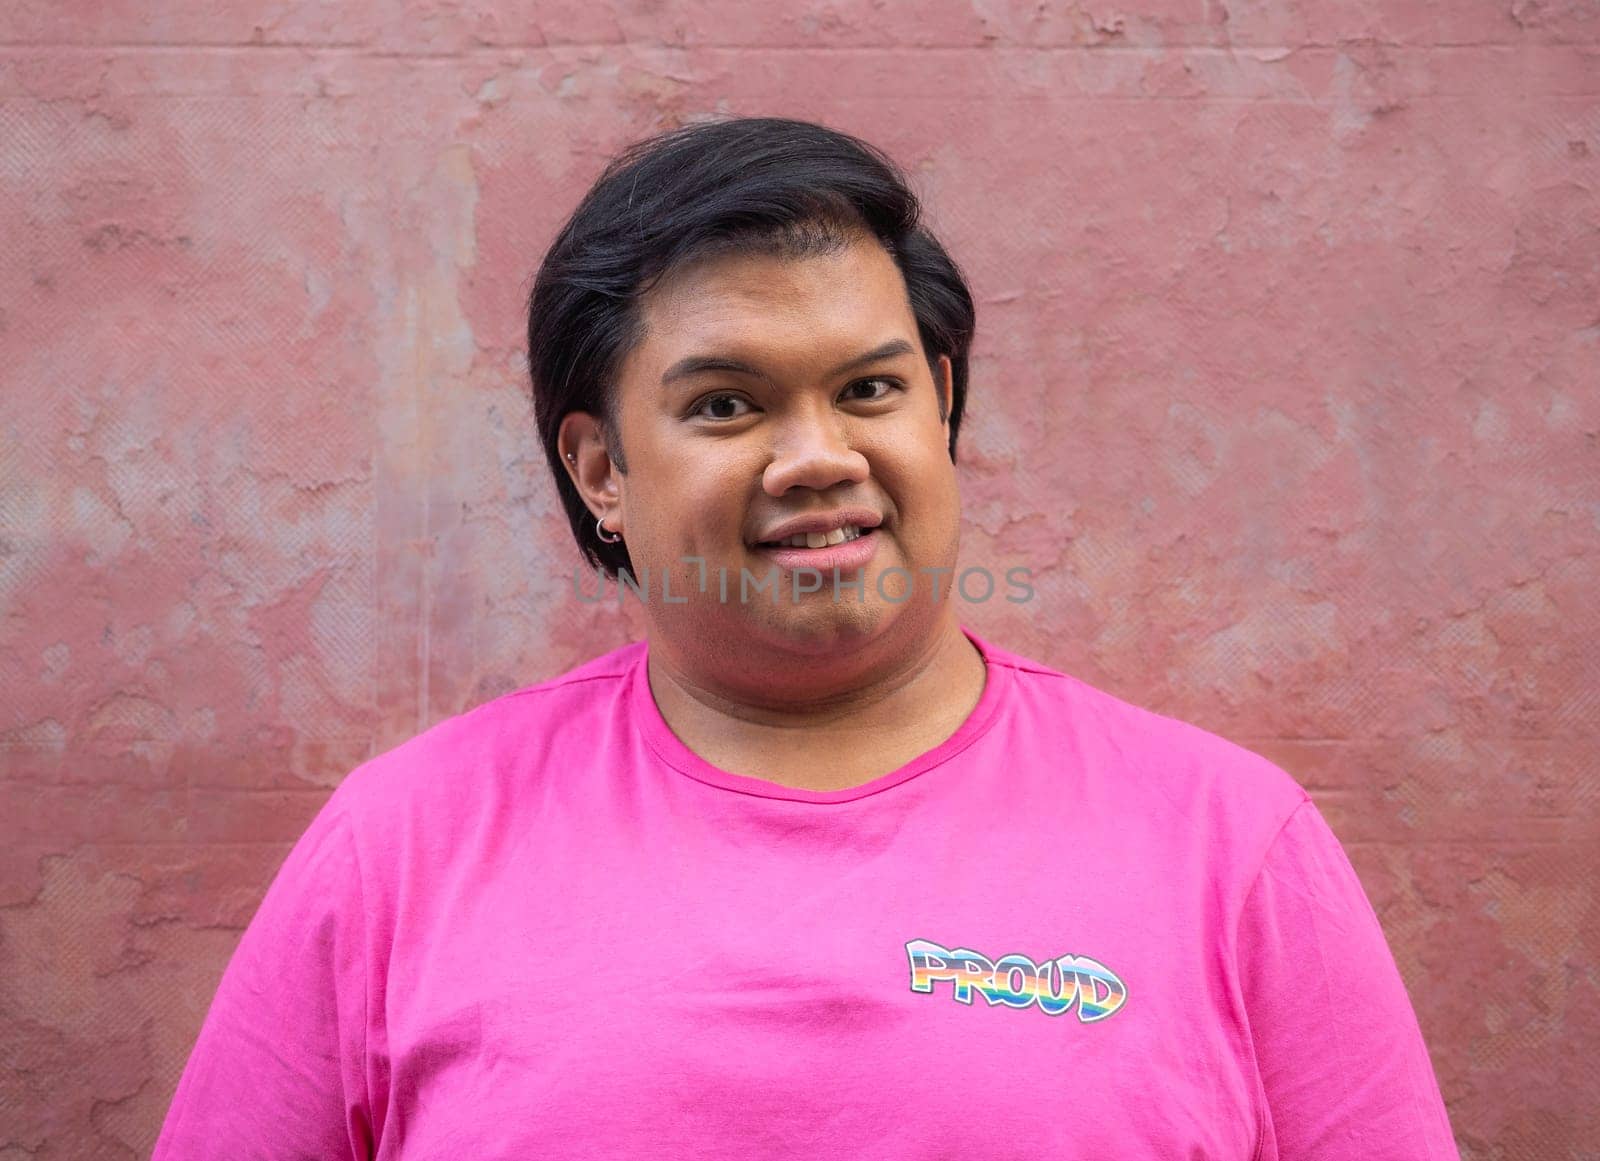 Portrait of asian man smiling with a shirt that he is proud to support homosexual community by papatonic